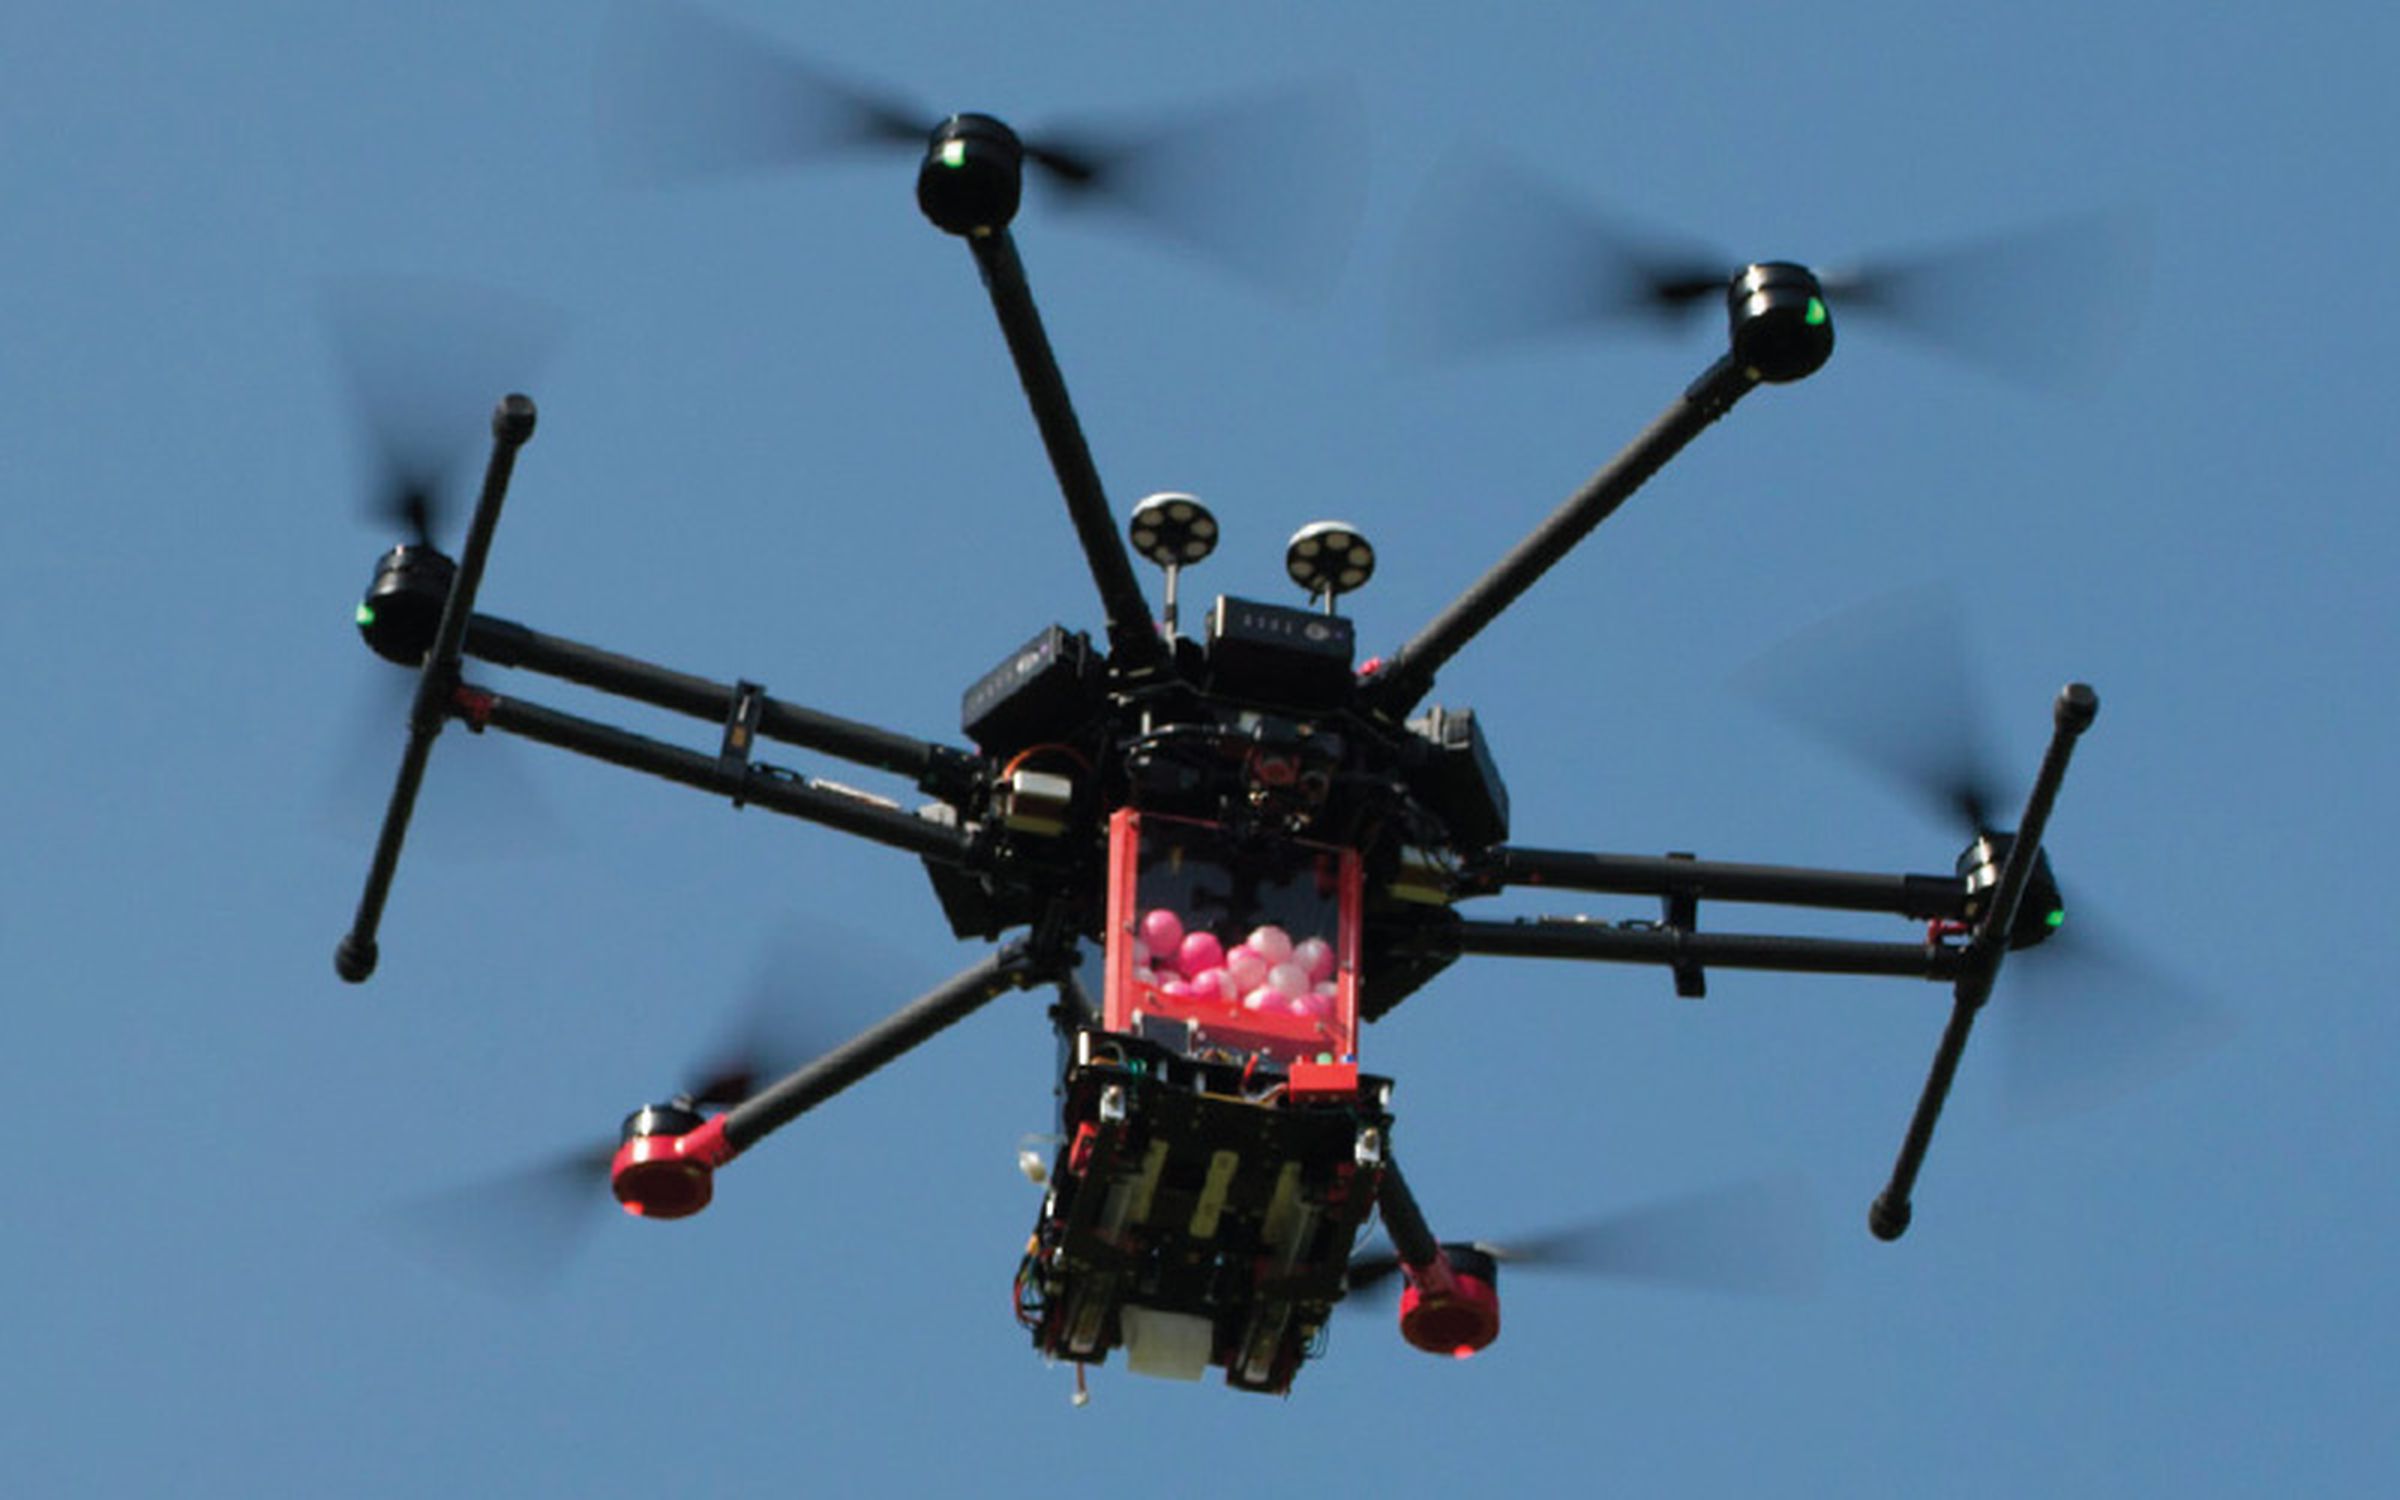 Ignis drones like the one pictured use infrared cameras and incendiary balls to carry out controlled burns. 